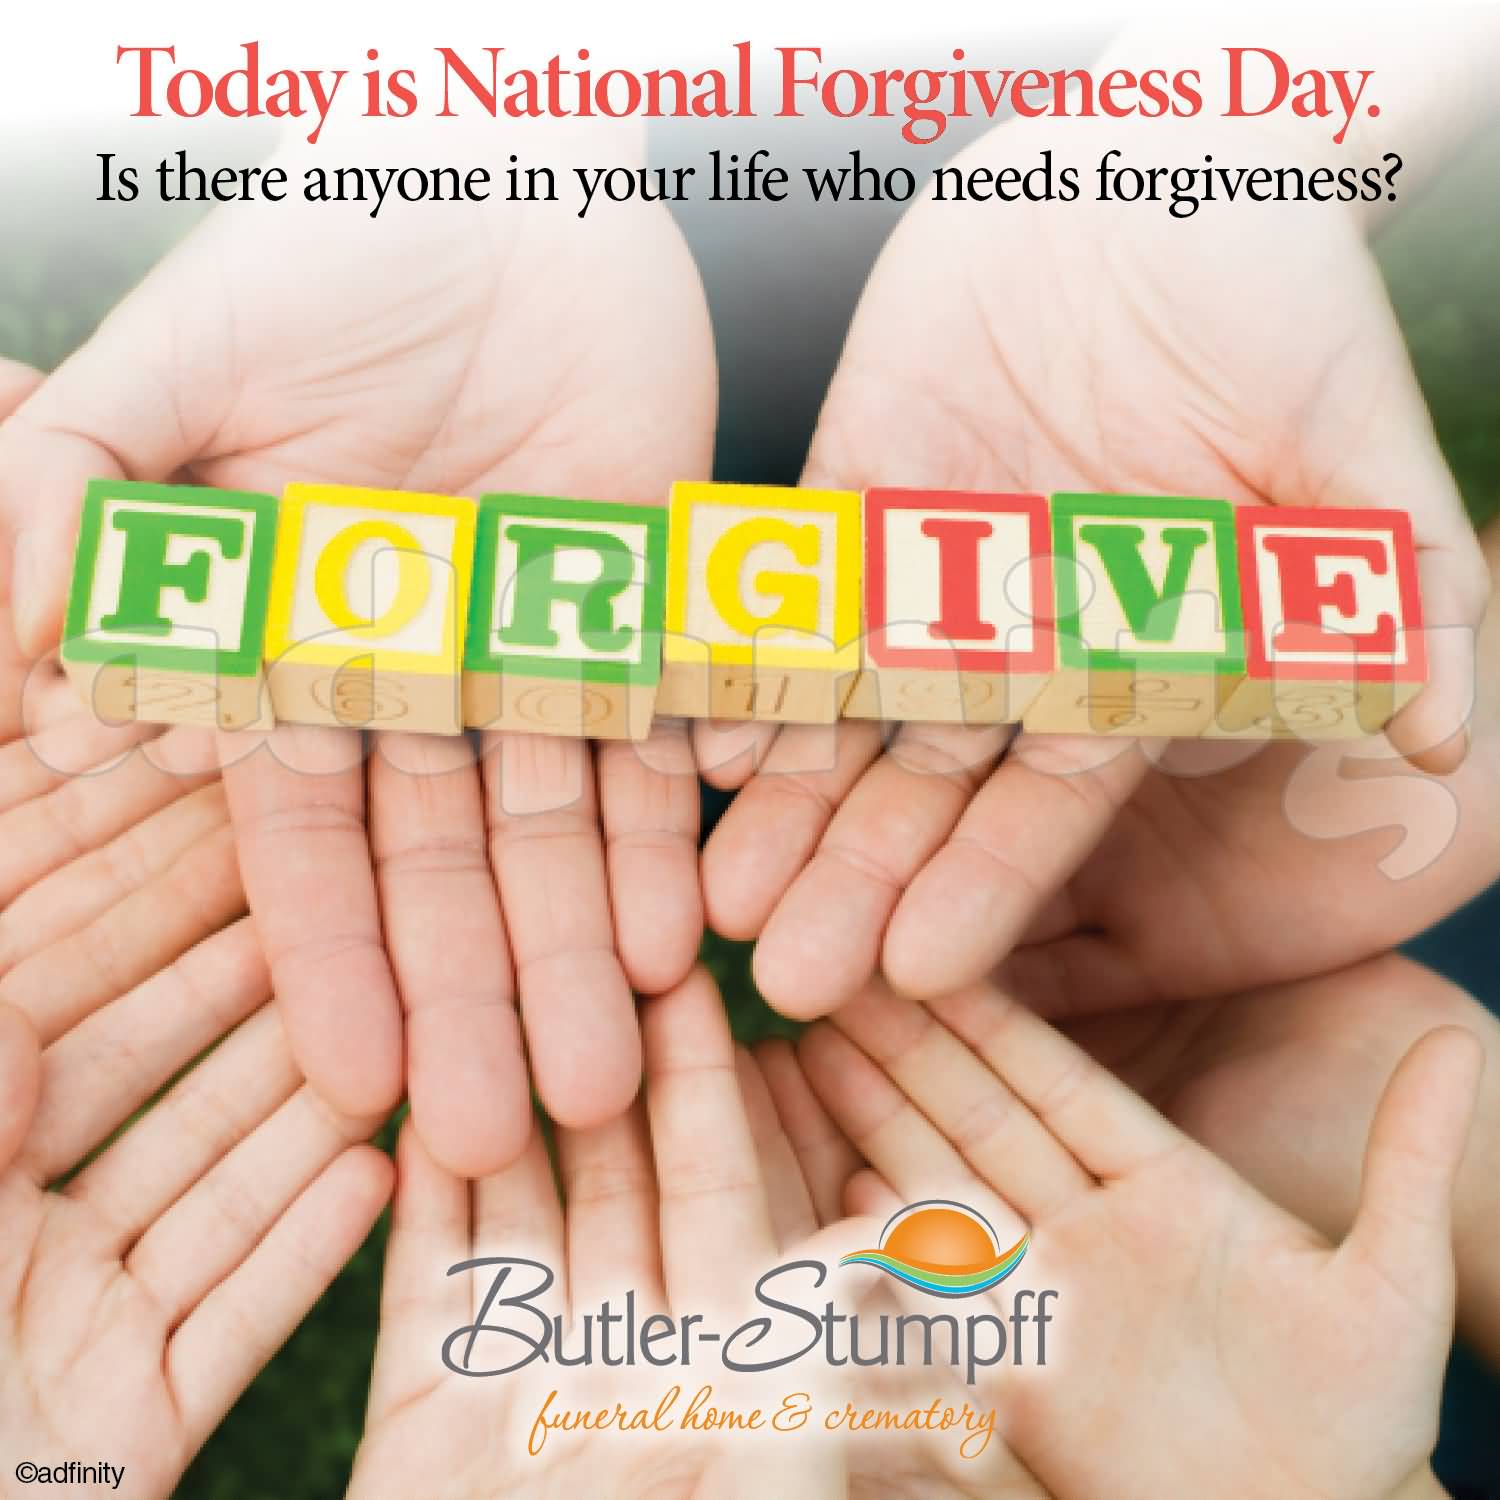 Today Is National Forgiveness Day – Forgive